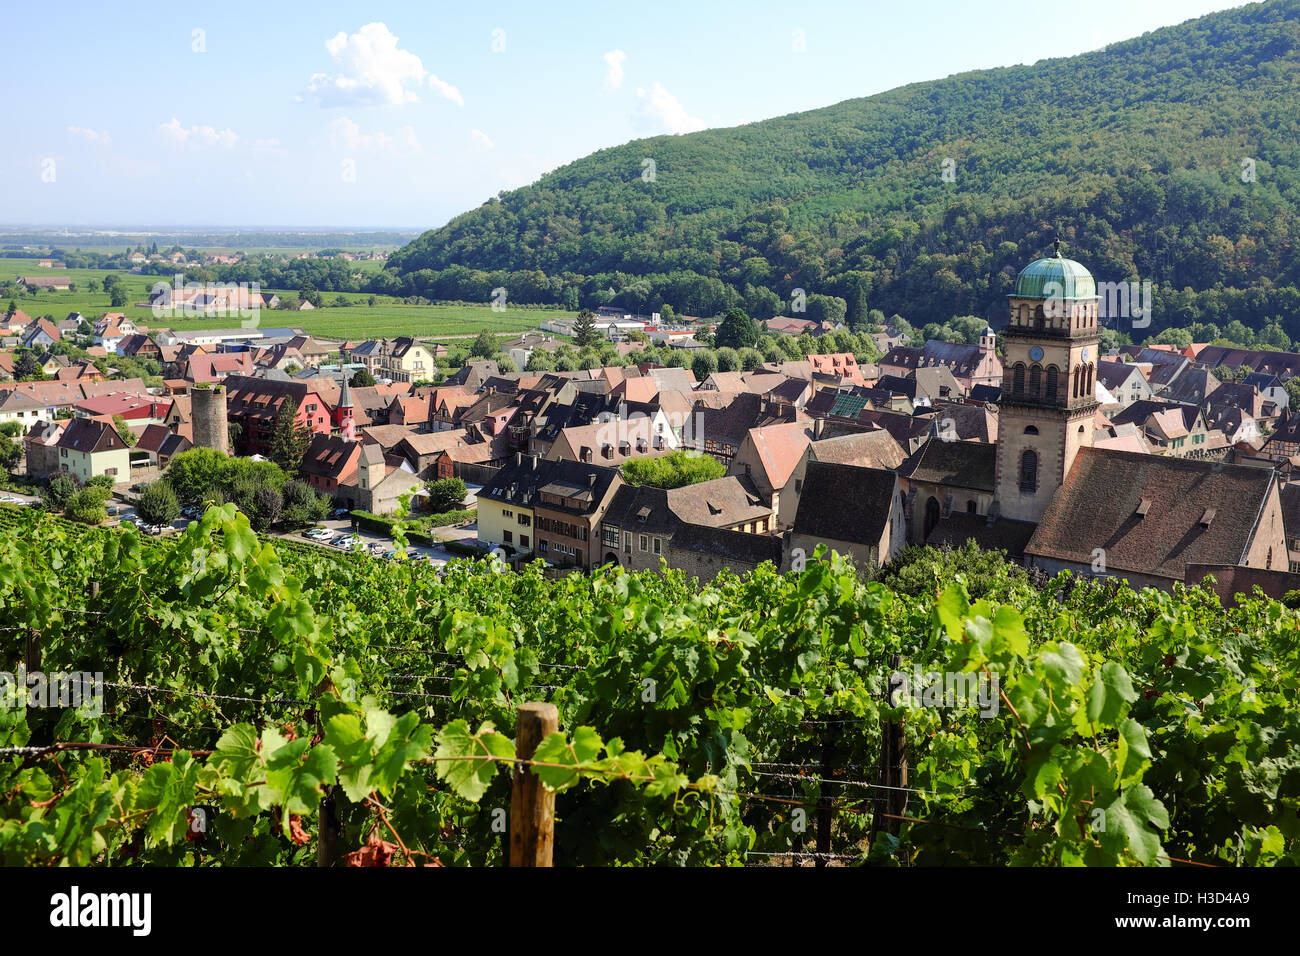 The view of Kaysersberg, France from the vineyards that surround the city. Stock Photo